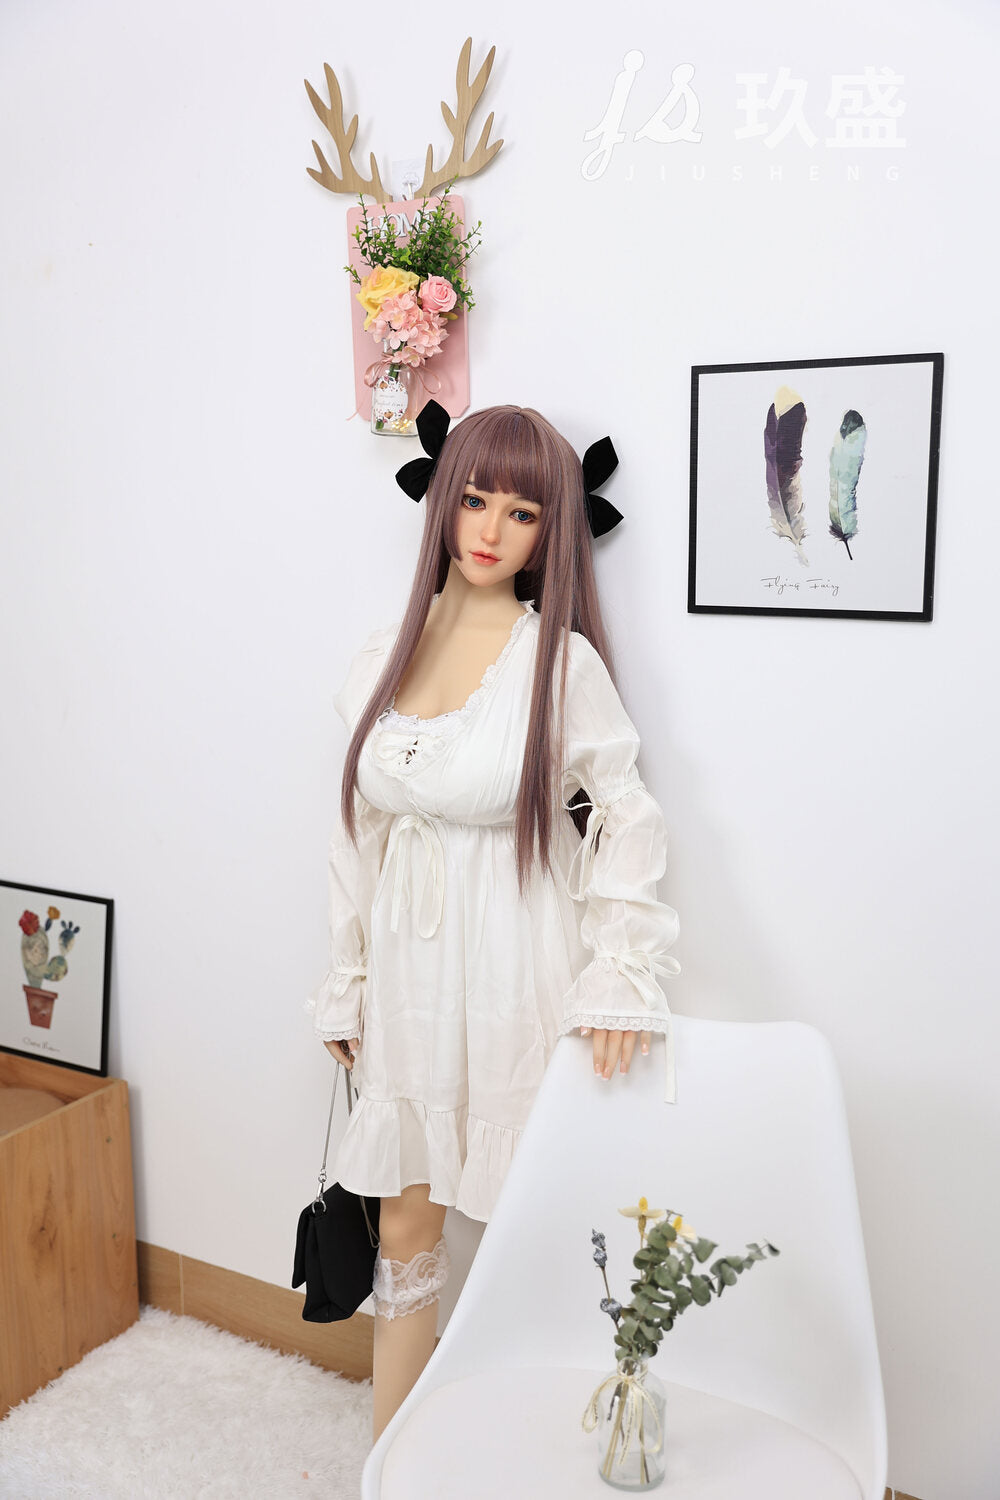 JIUSHENG DOLL 150cm/4ft11 D-cup Silicone Head Sex Doll – Shirley